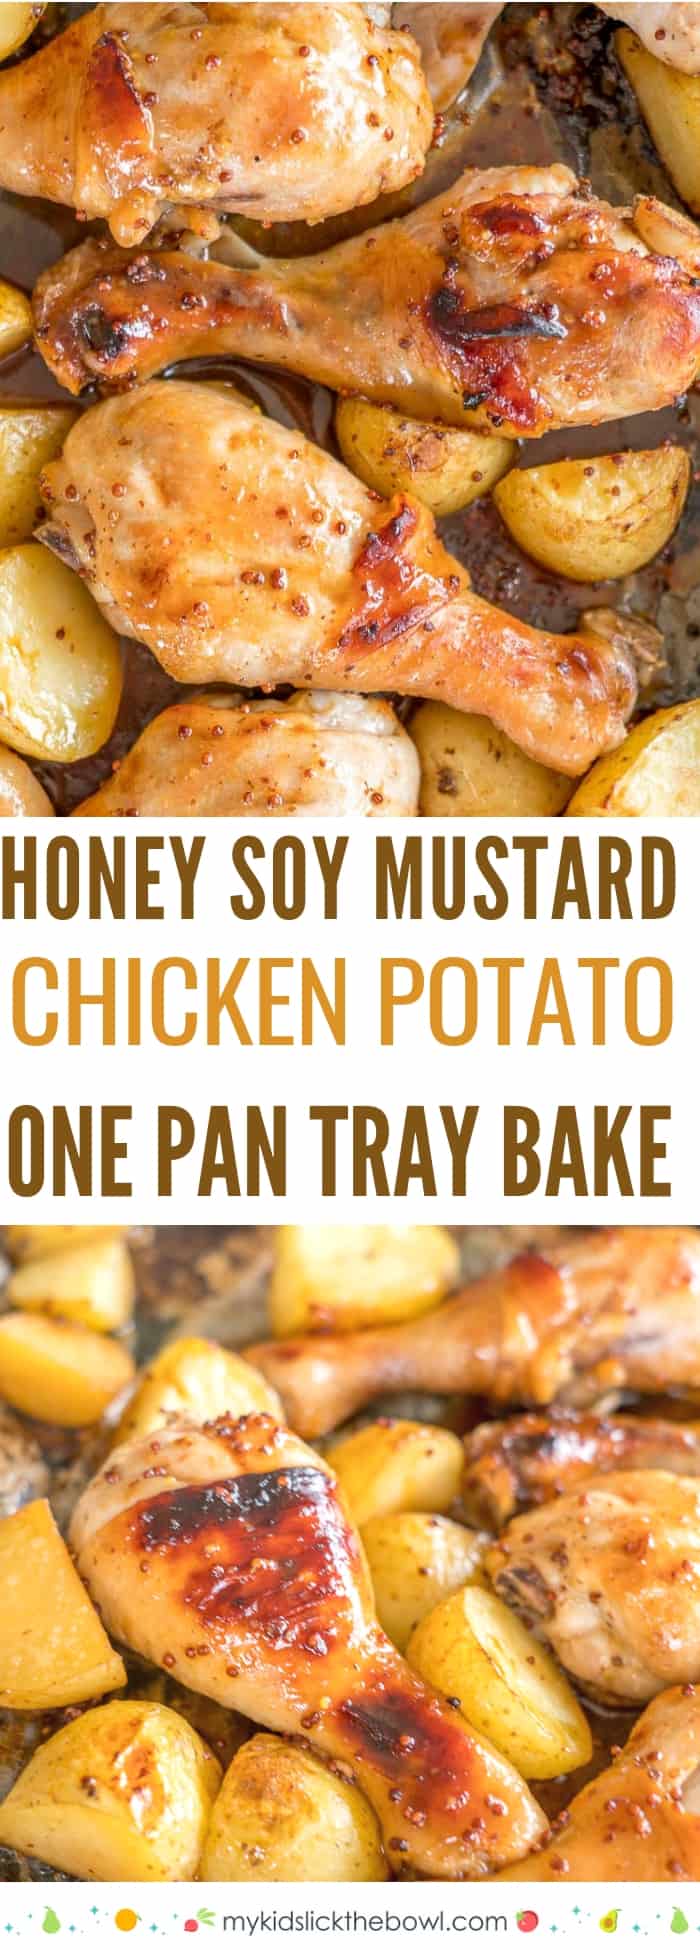 baked honey soy mustard chicken and potatoes